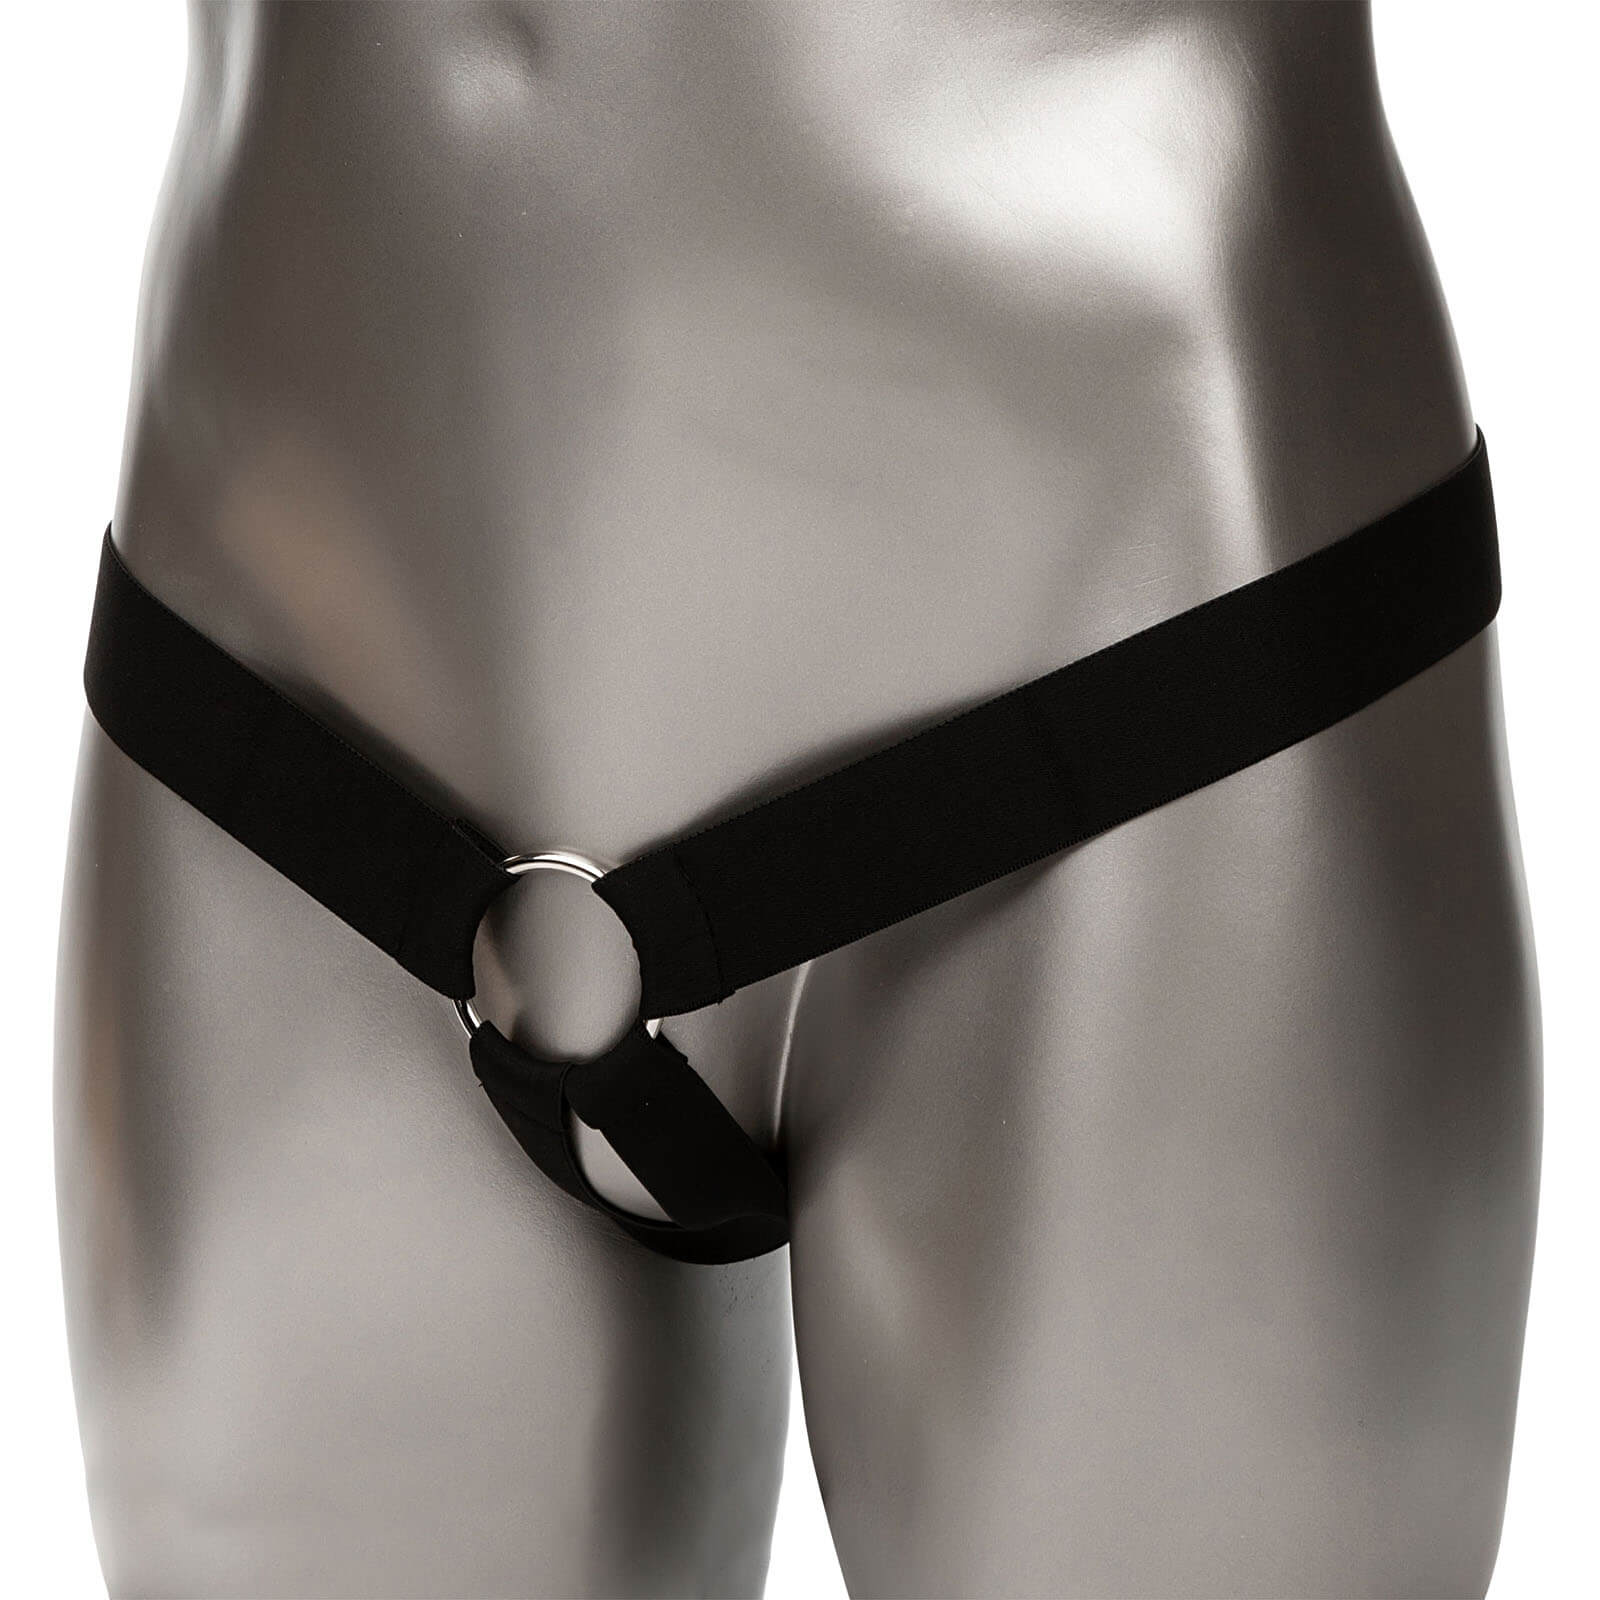 CalExotics Maxx Lifelike Extension with Harness (Brown), dutý strap-on penis